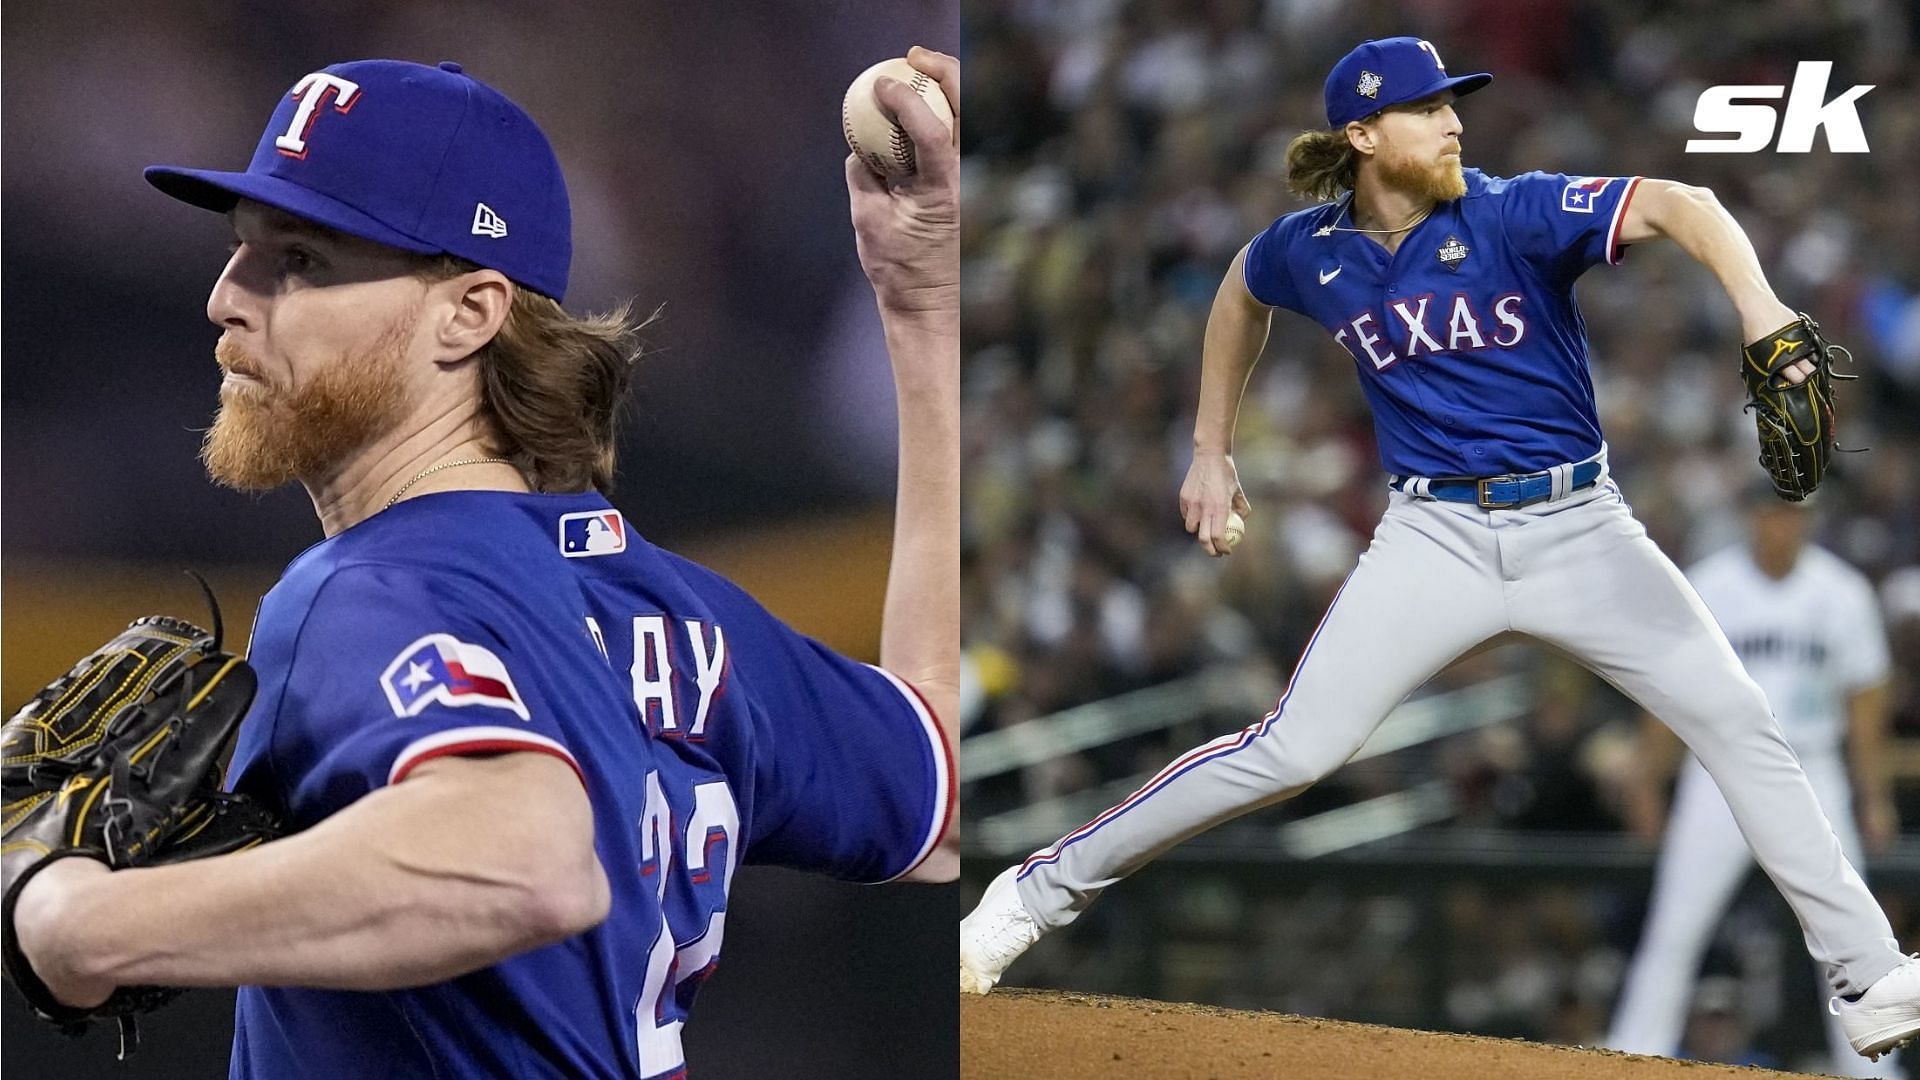 Jon Gray has been praised for his selfless play for the Texas Rangers during the World Series